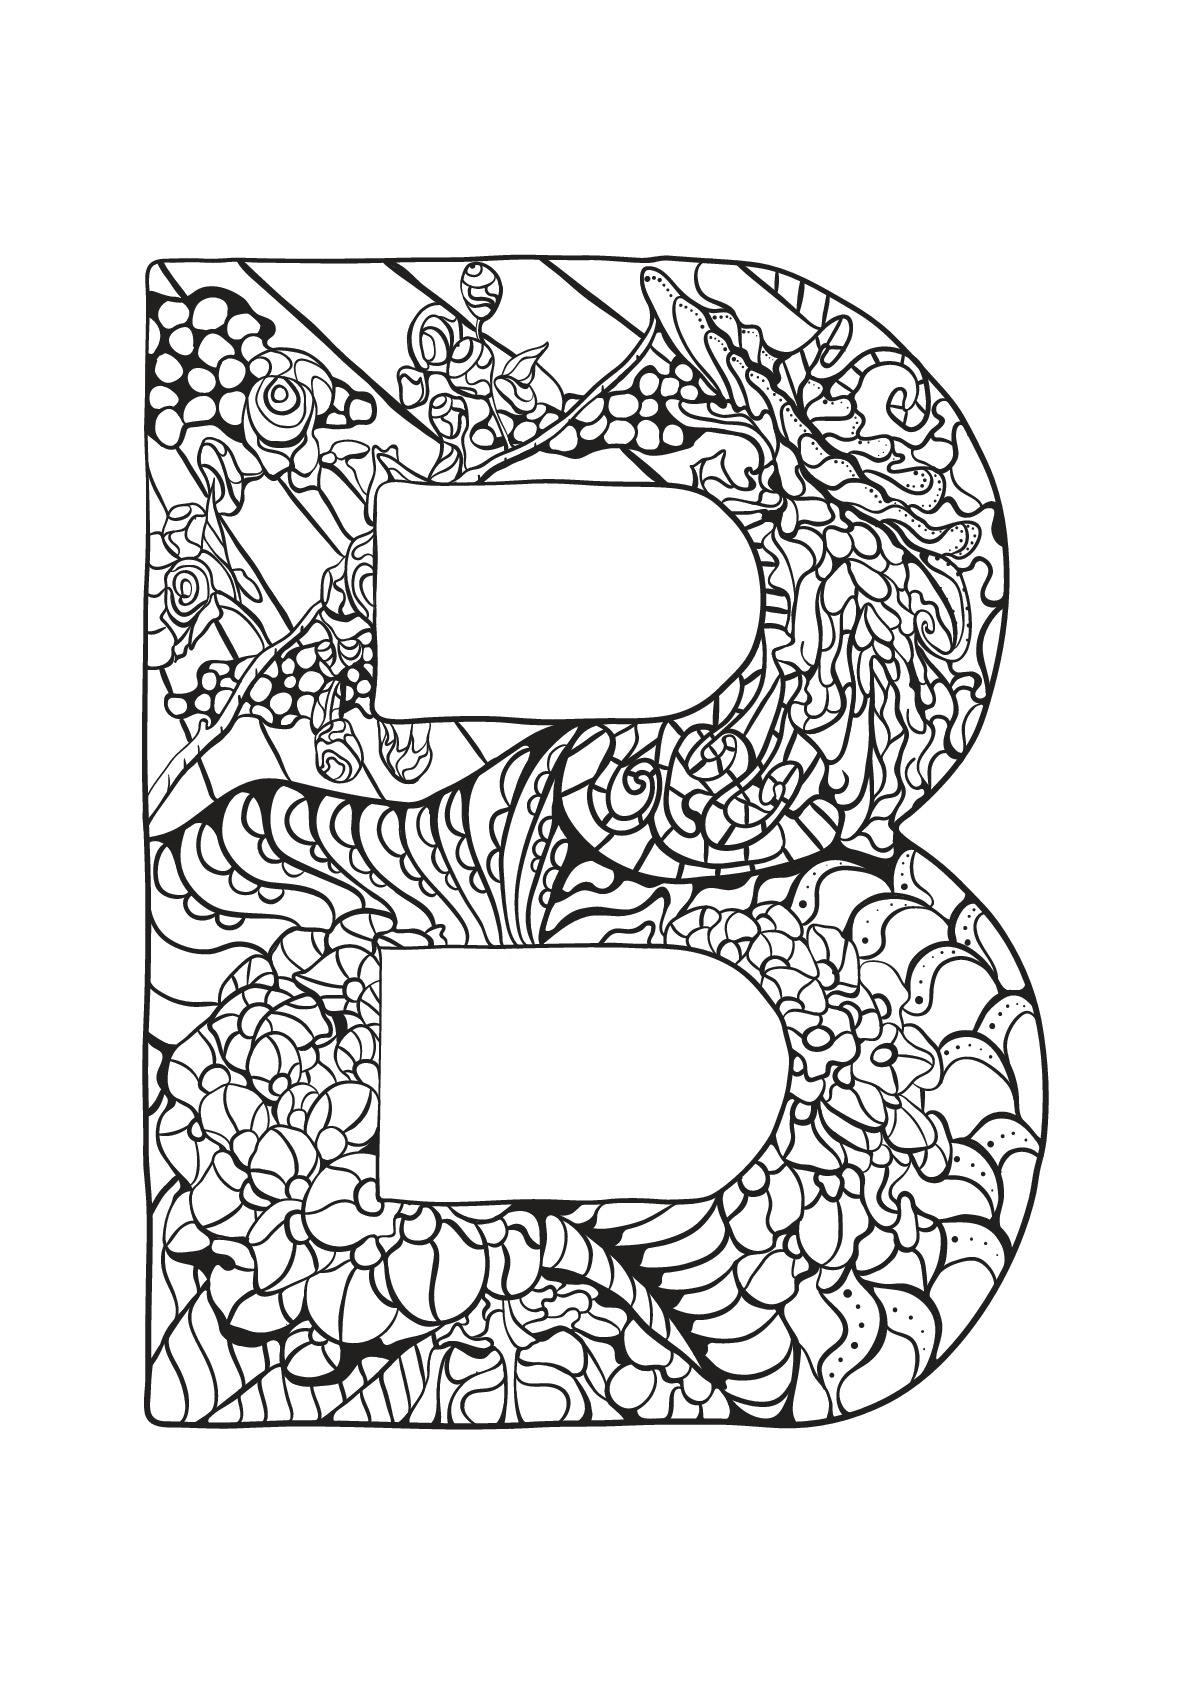 Download Alphabet to download for free : B - Alphabet Kids Coloring Pages